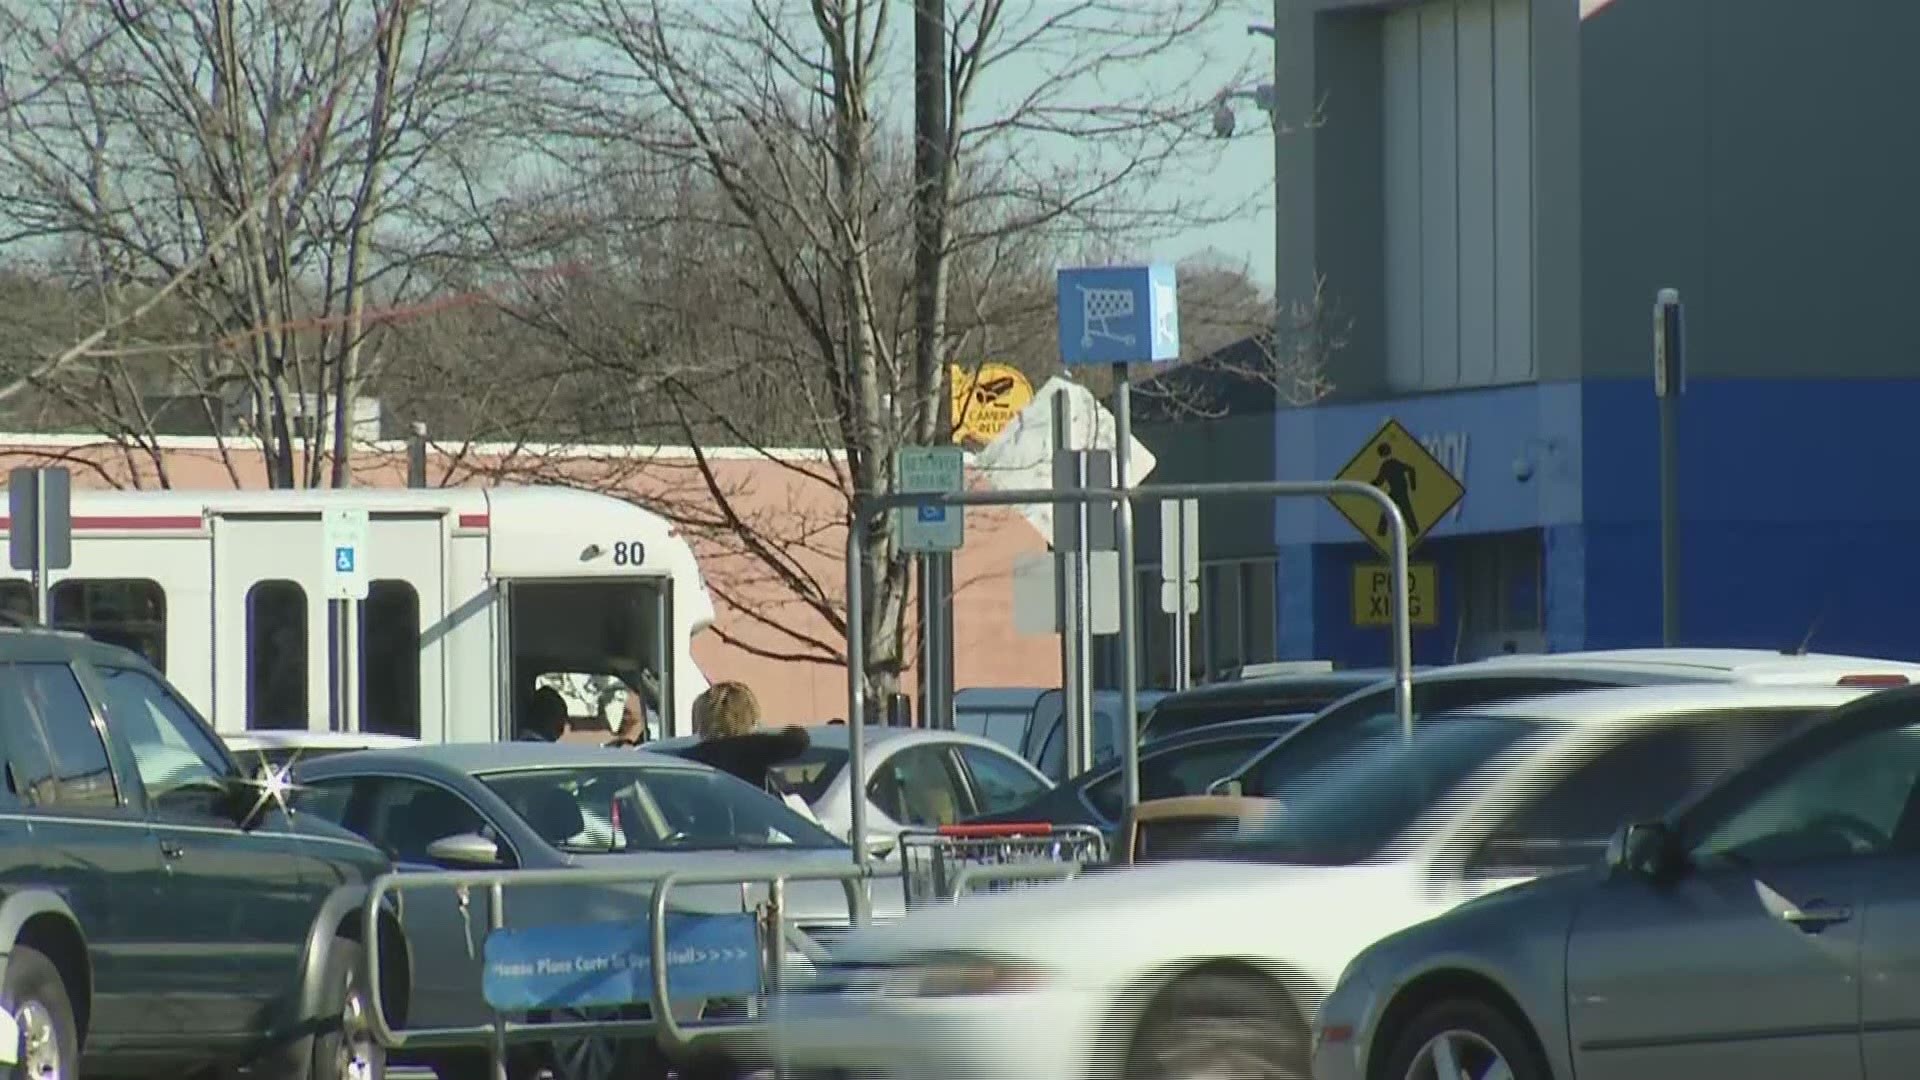 Two people were shot Tuesday afternoon in a Walmart parking lot near Eastgate, Chattanooga Police said.